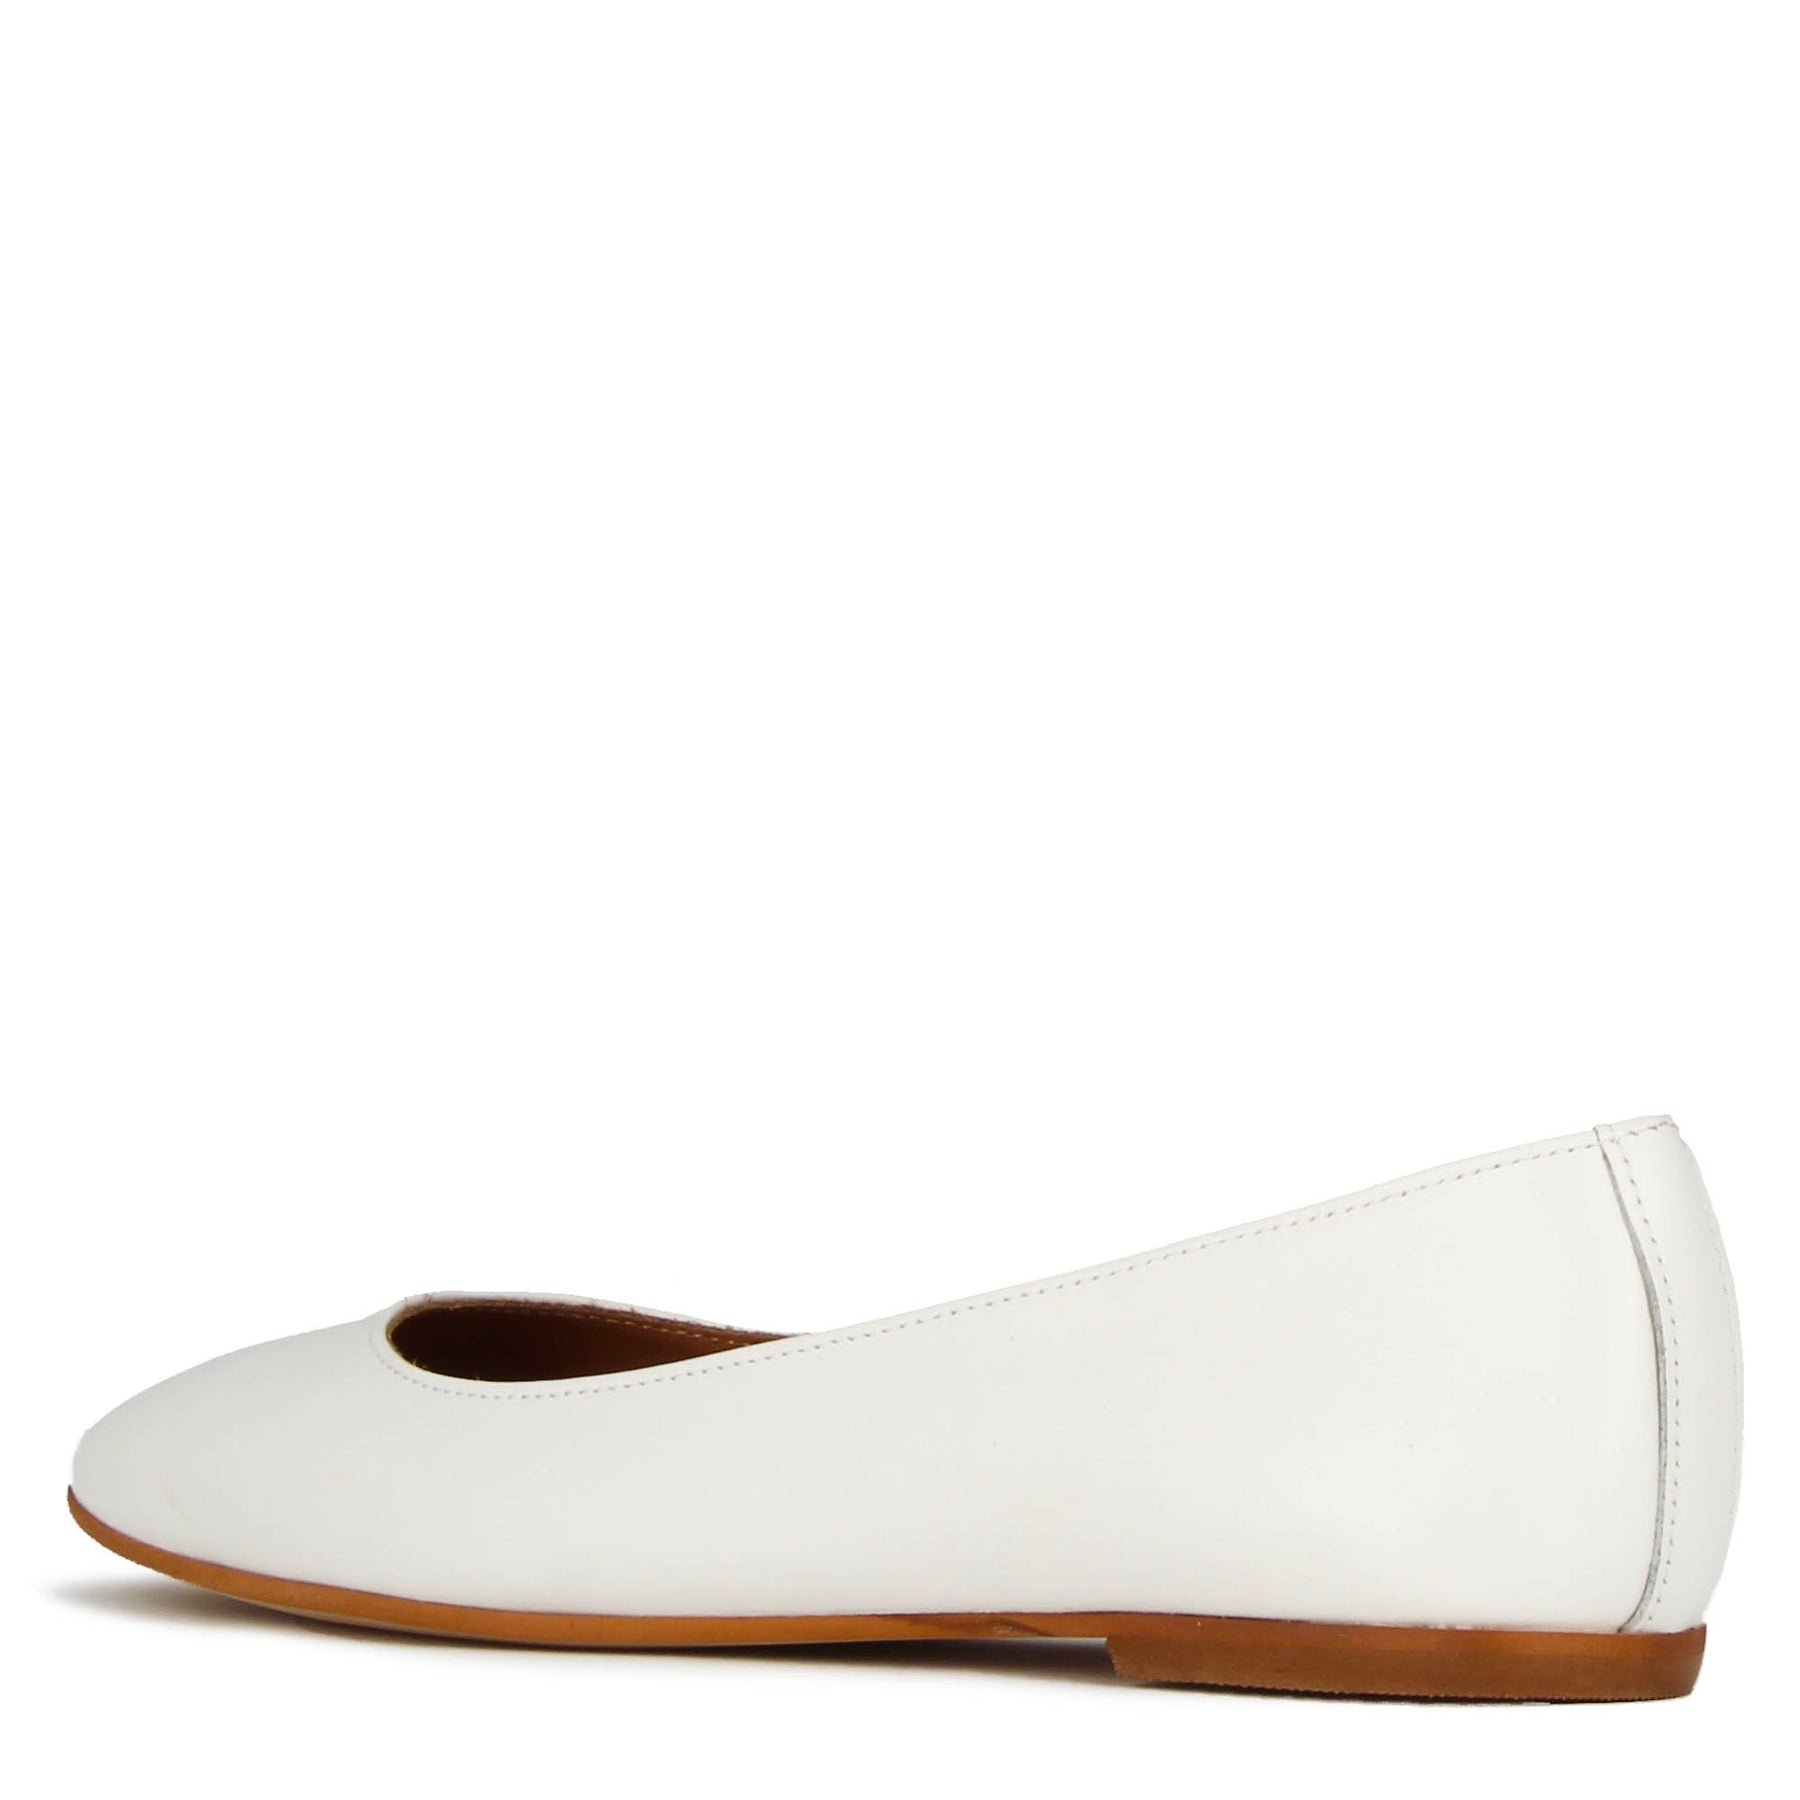 Handmade women's casual ballet flat in white smooth leather